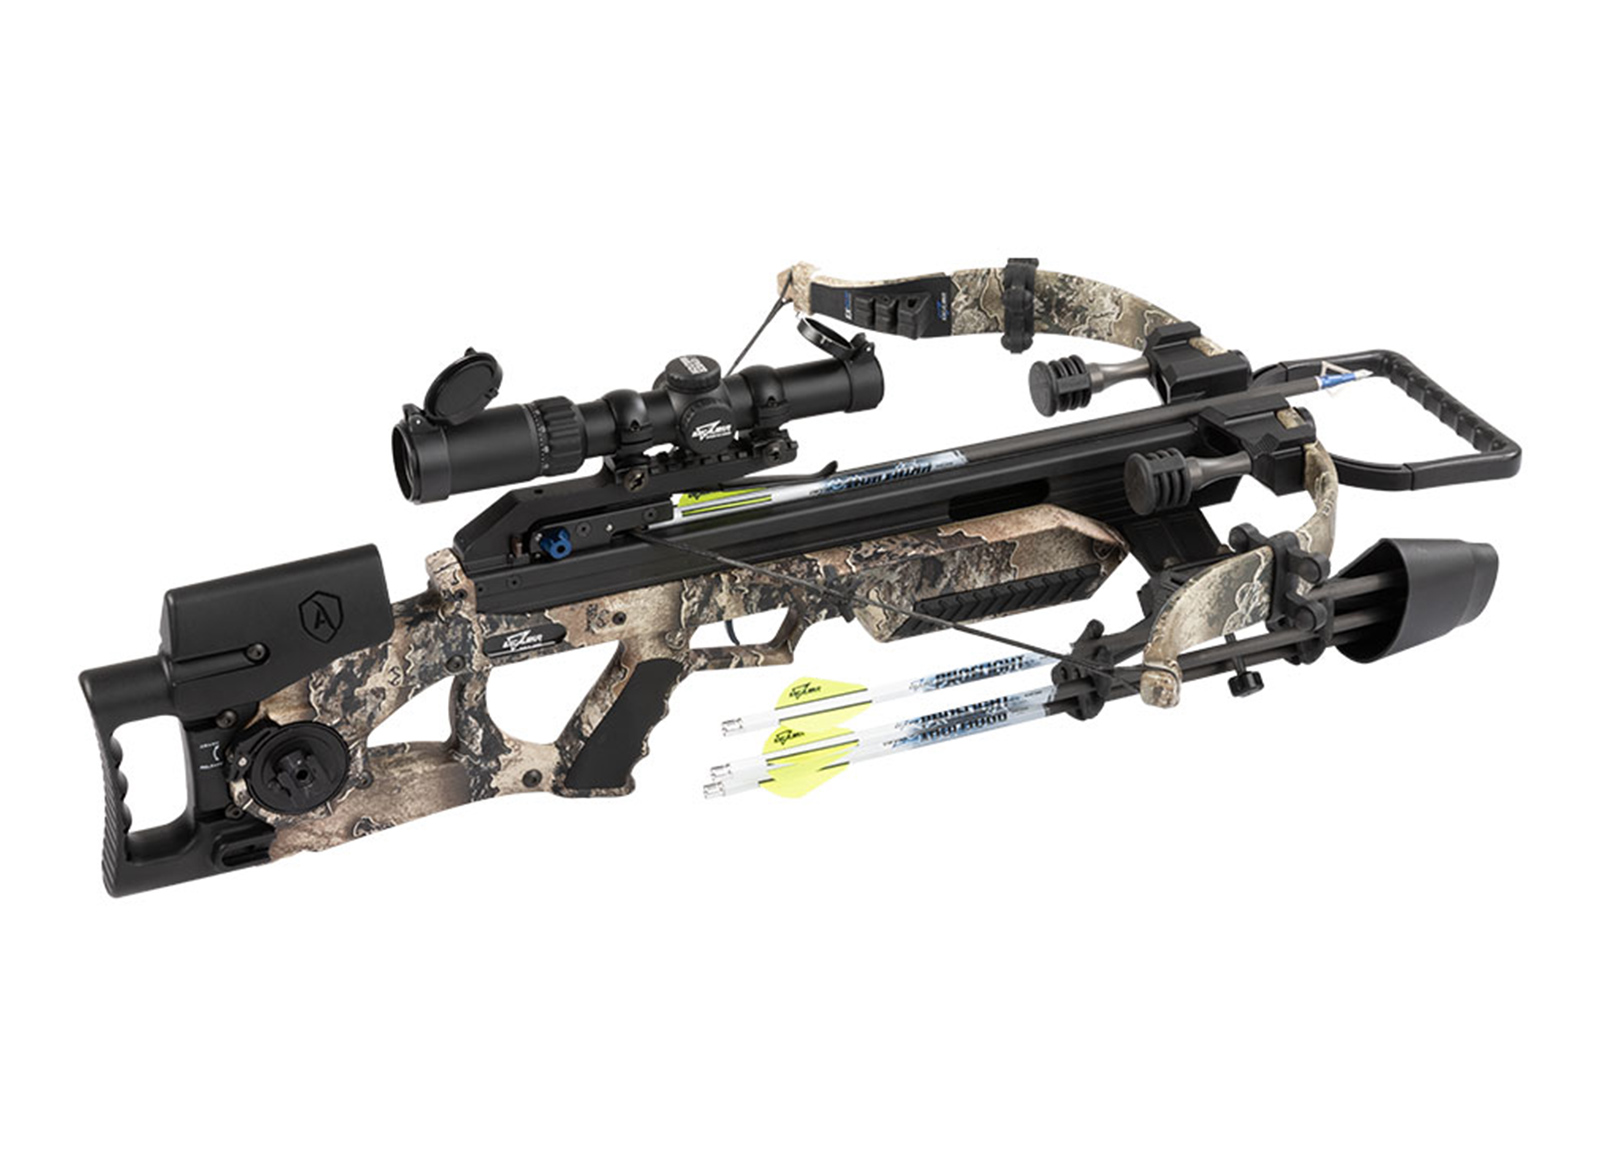 EXCALIBUR ASSASSIN EXTREME CROSSBOW PACKAGE CAMO WITH OVERWATCH SCOPE